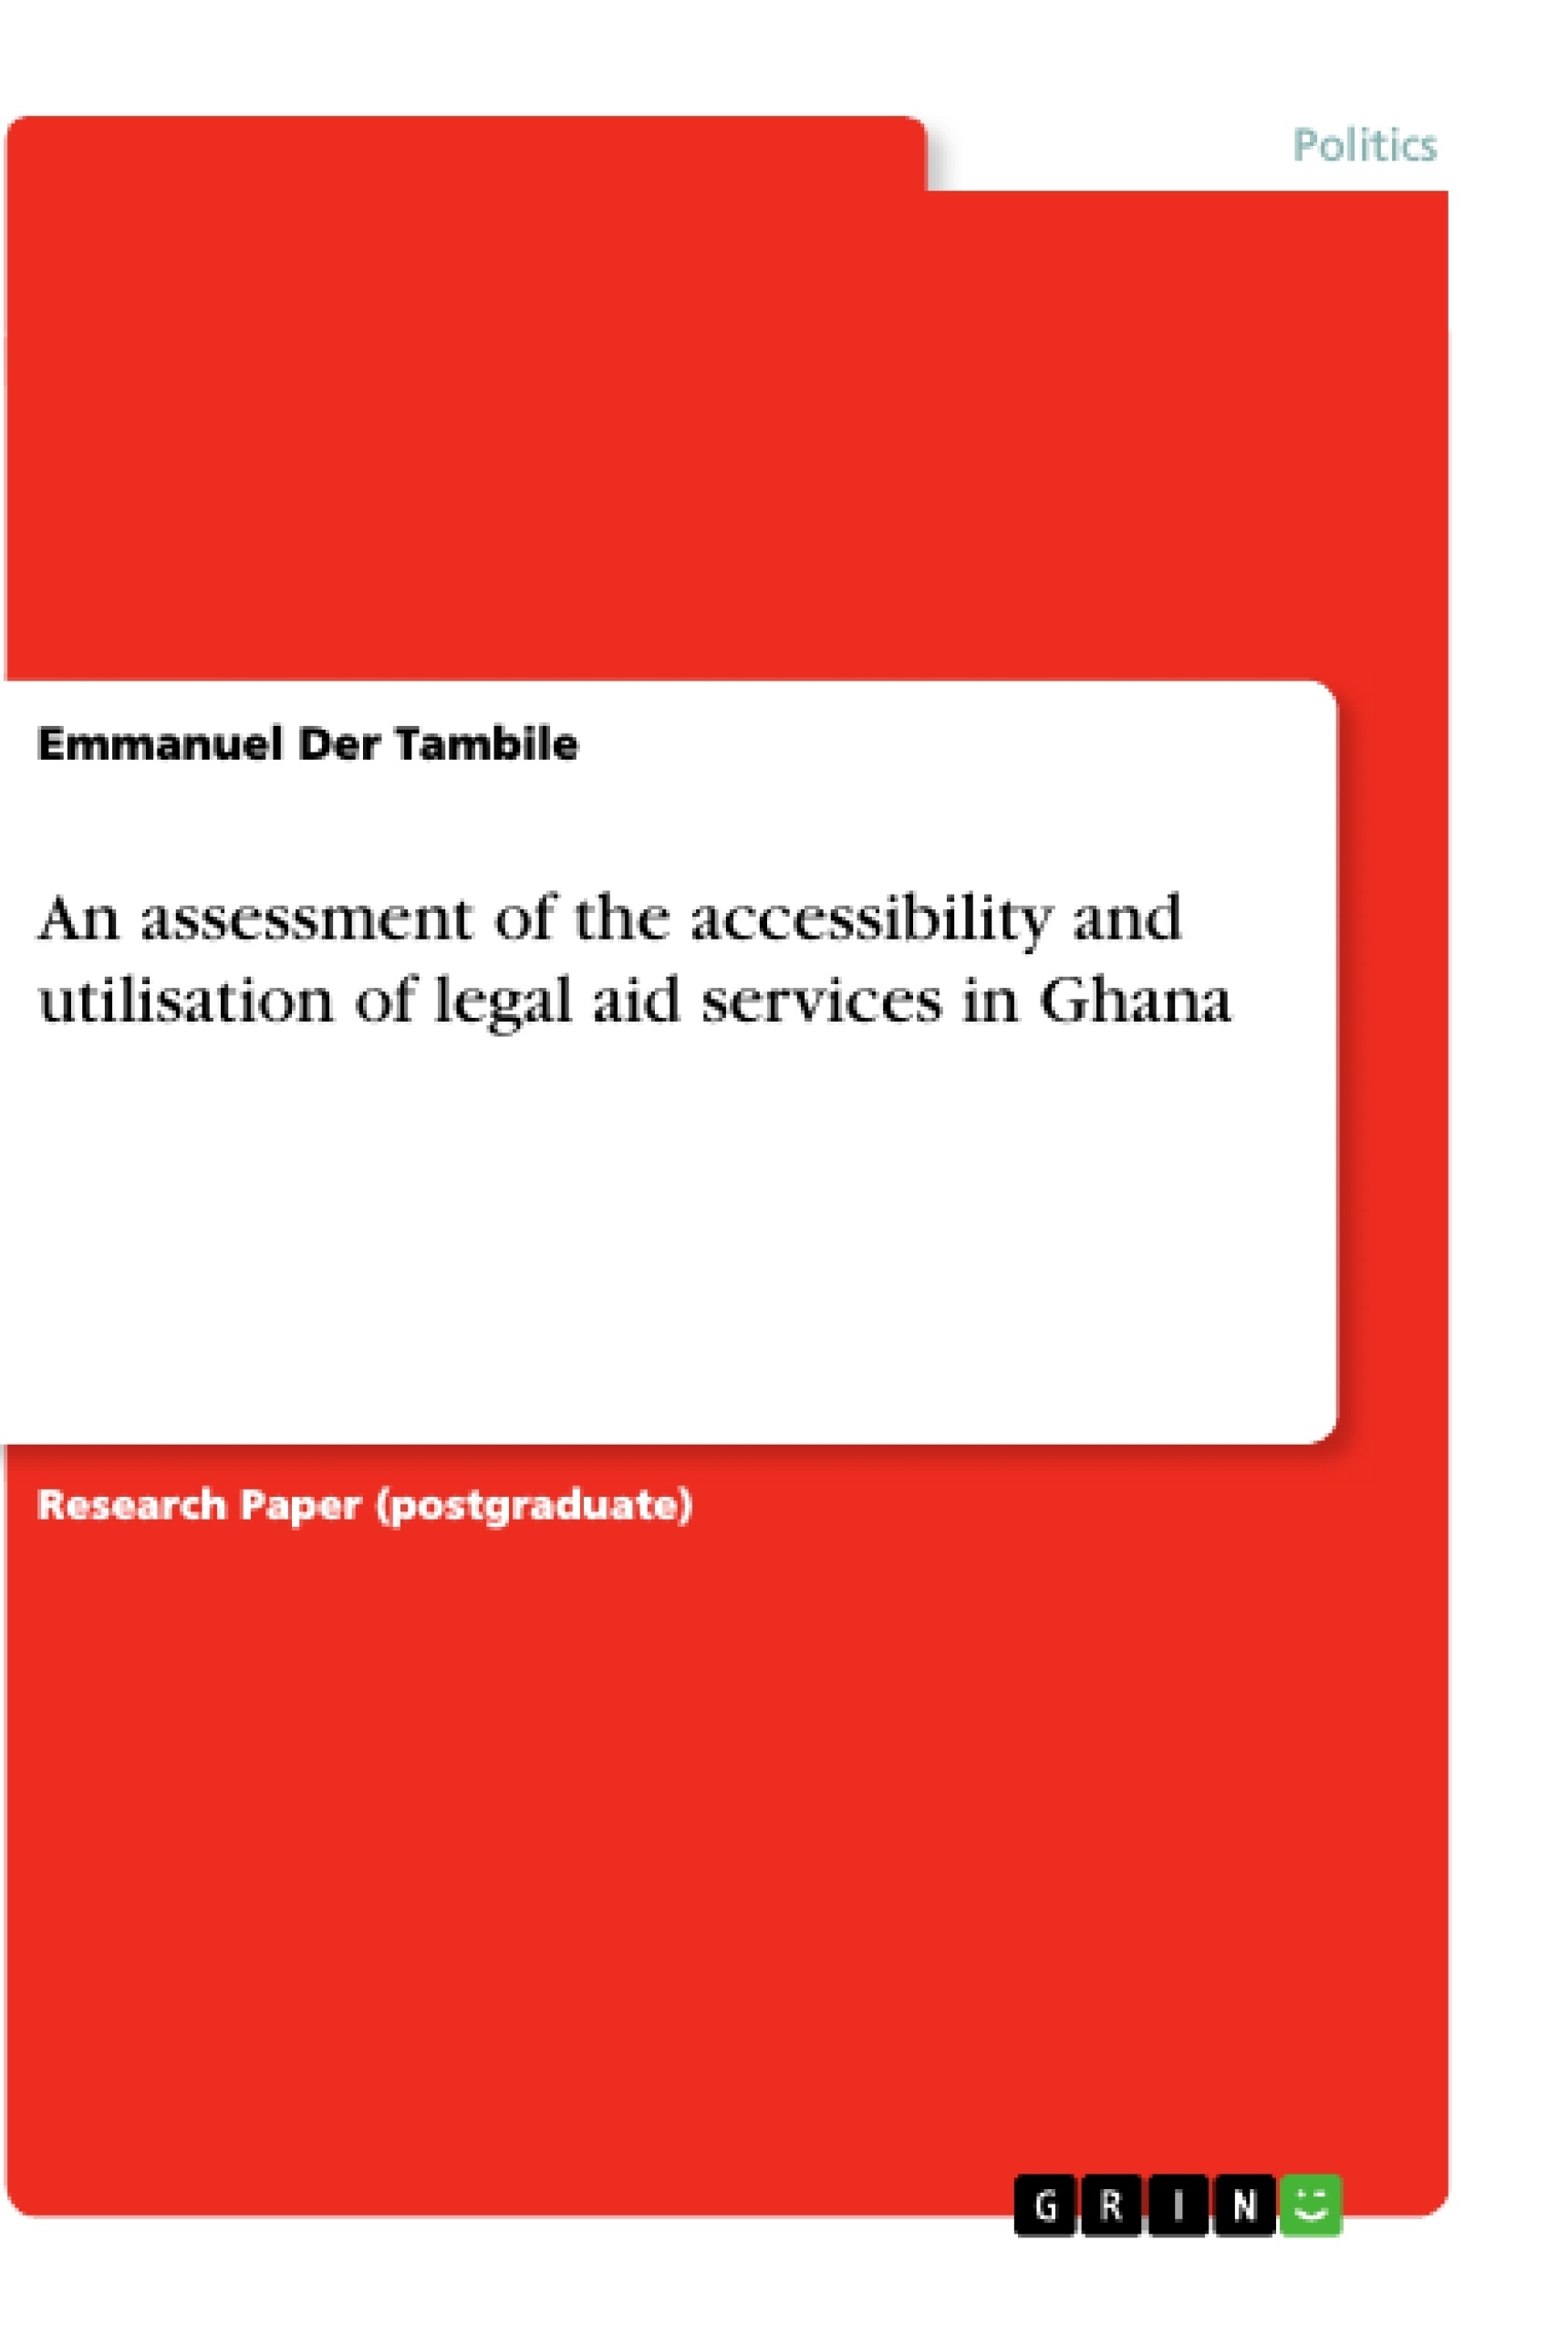 Titel: An assessment of the accessibility and utilisation of legal aid services in Ghana